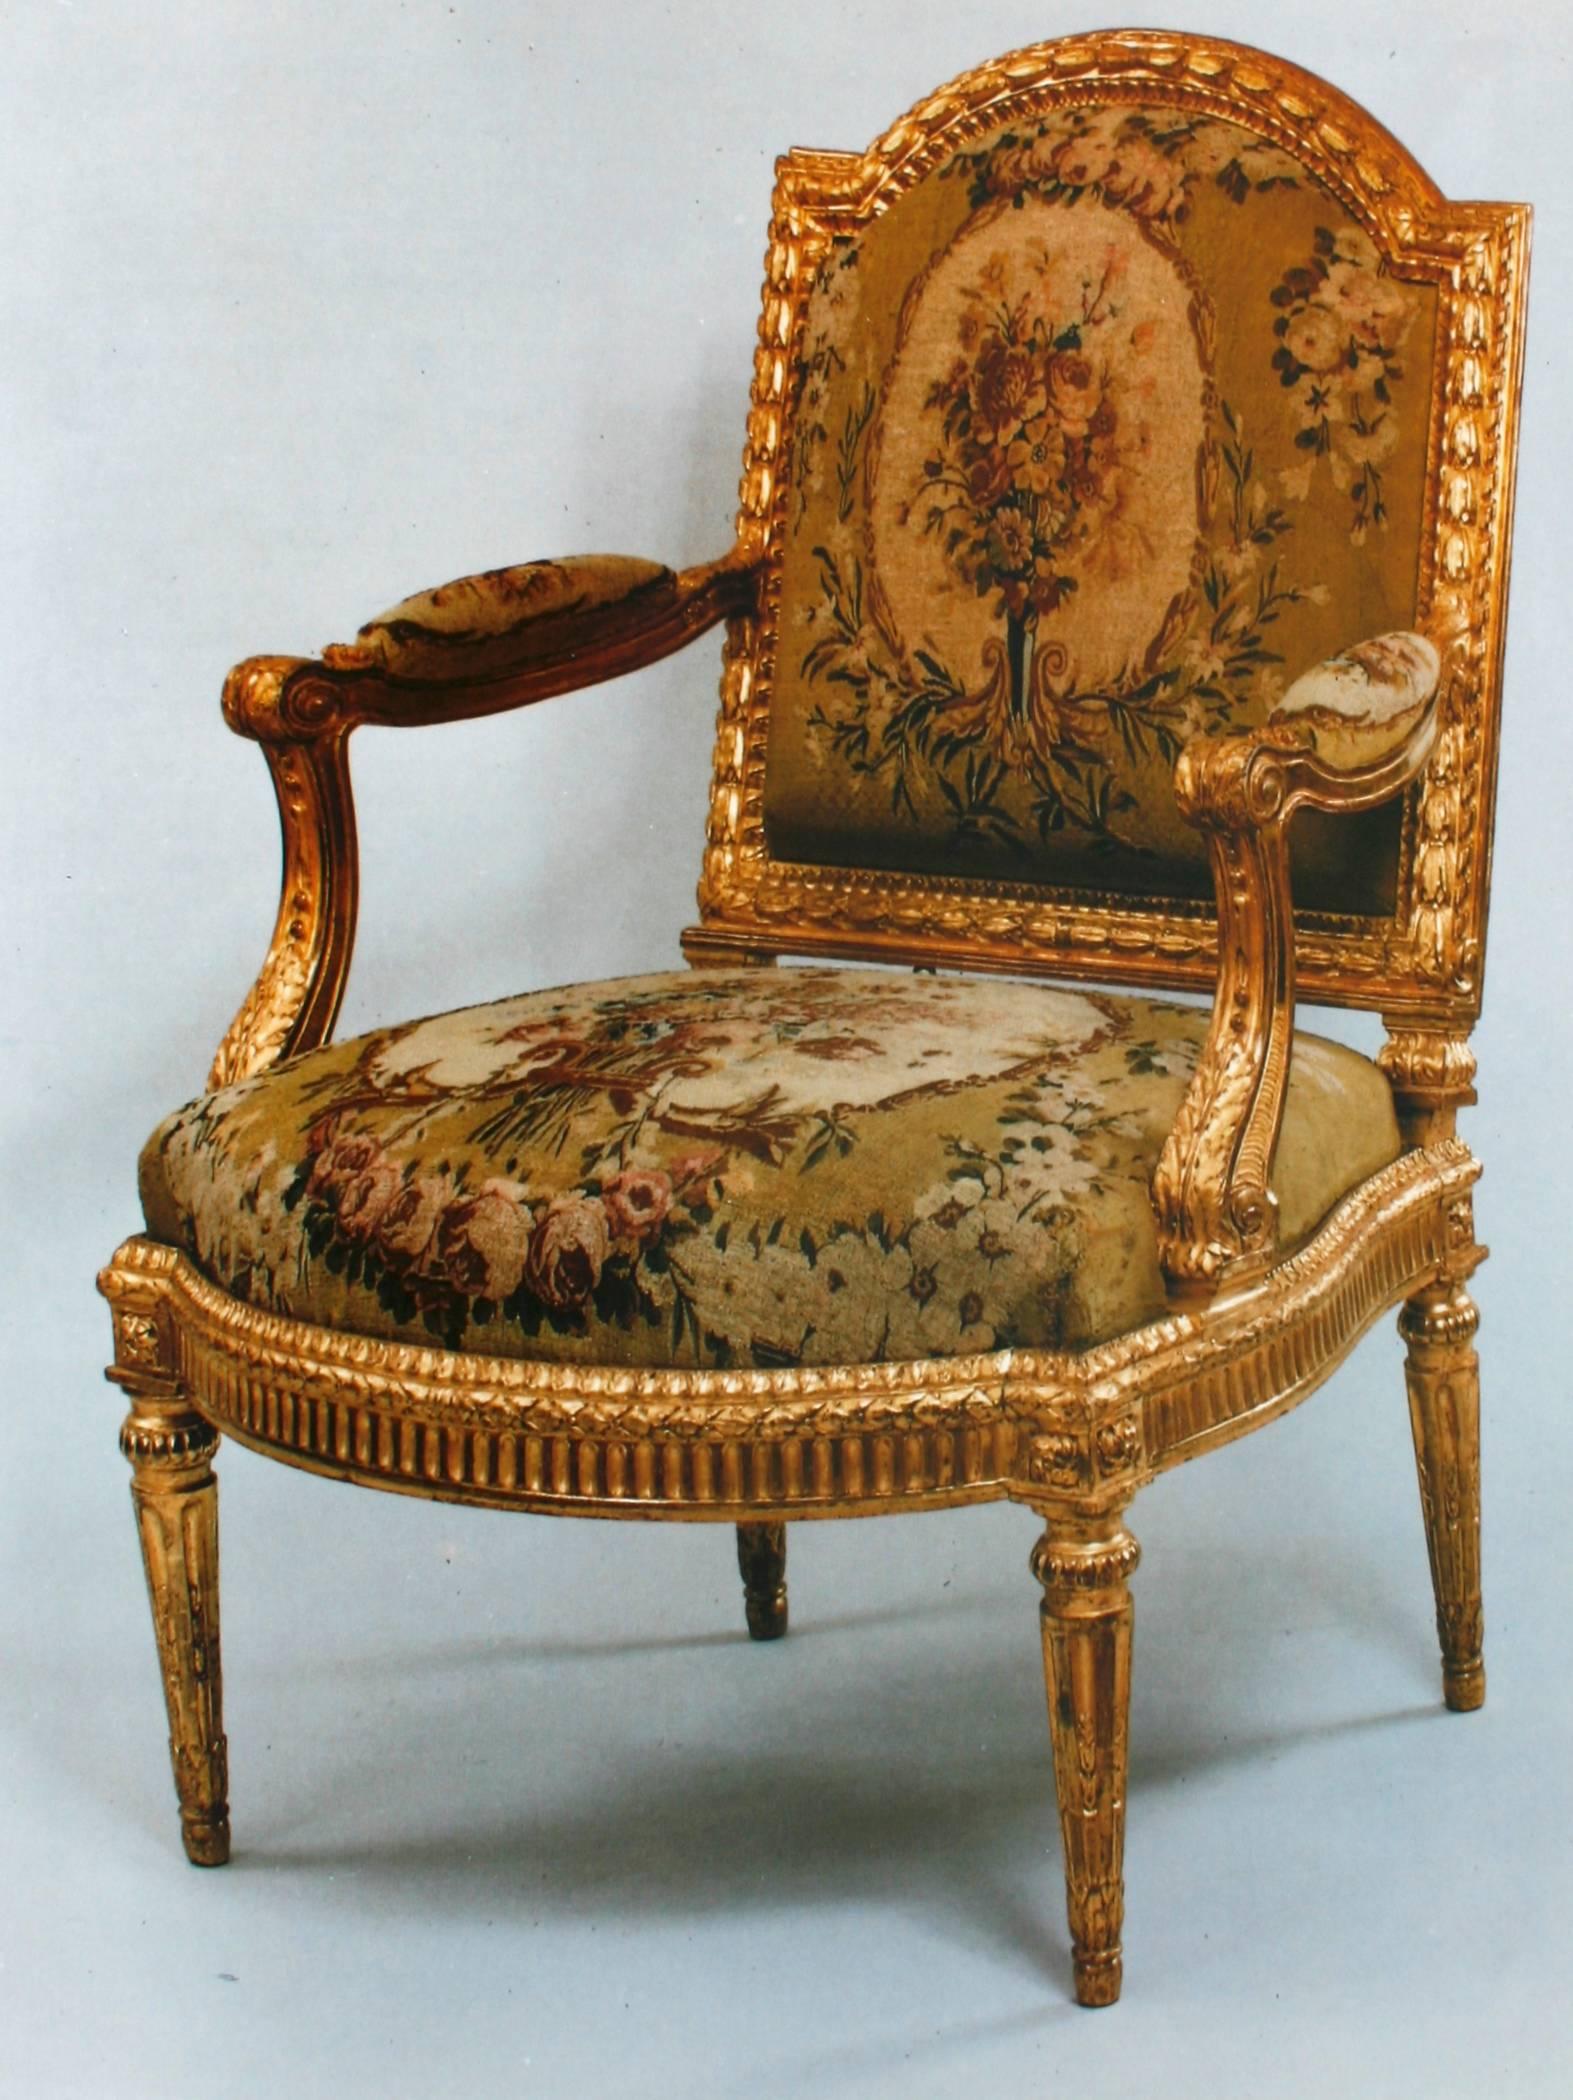 20th Century The Art of The Chair in Eighteenth-Century France, by Bill G.B. Pallot, 1st Ed